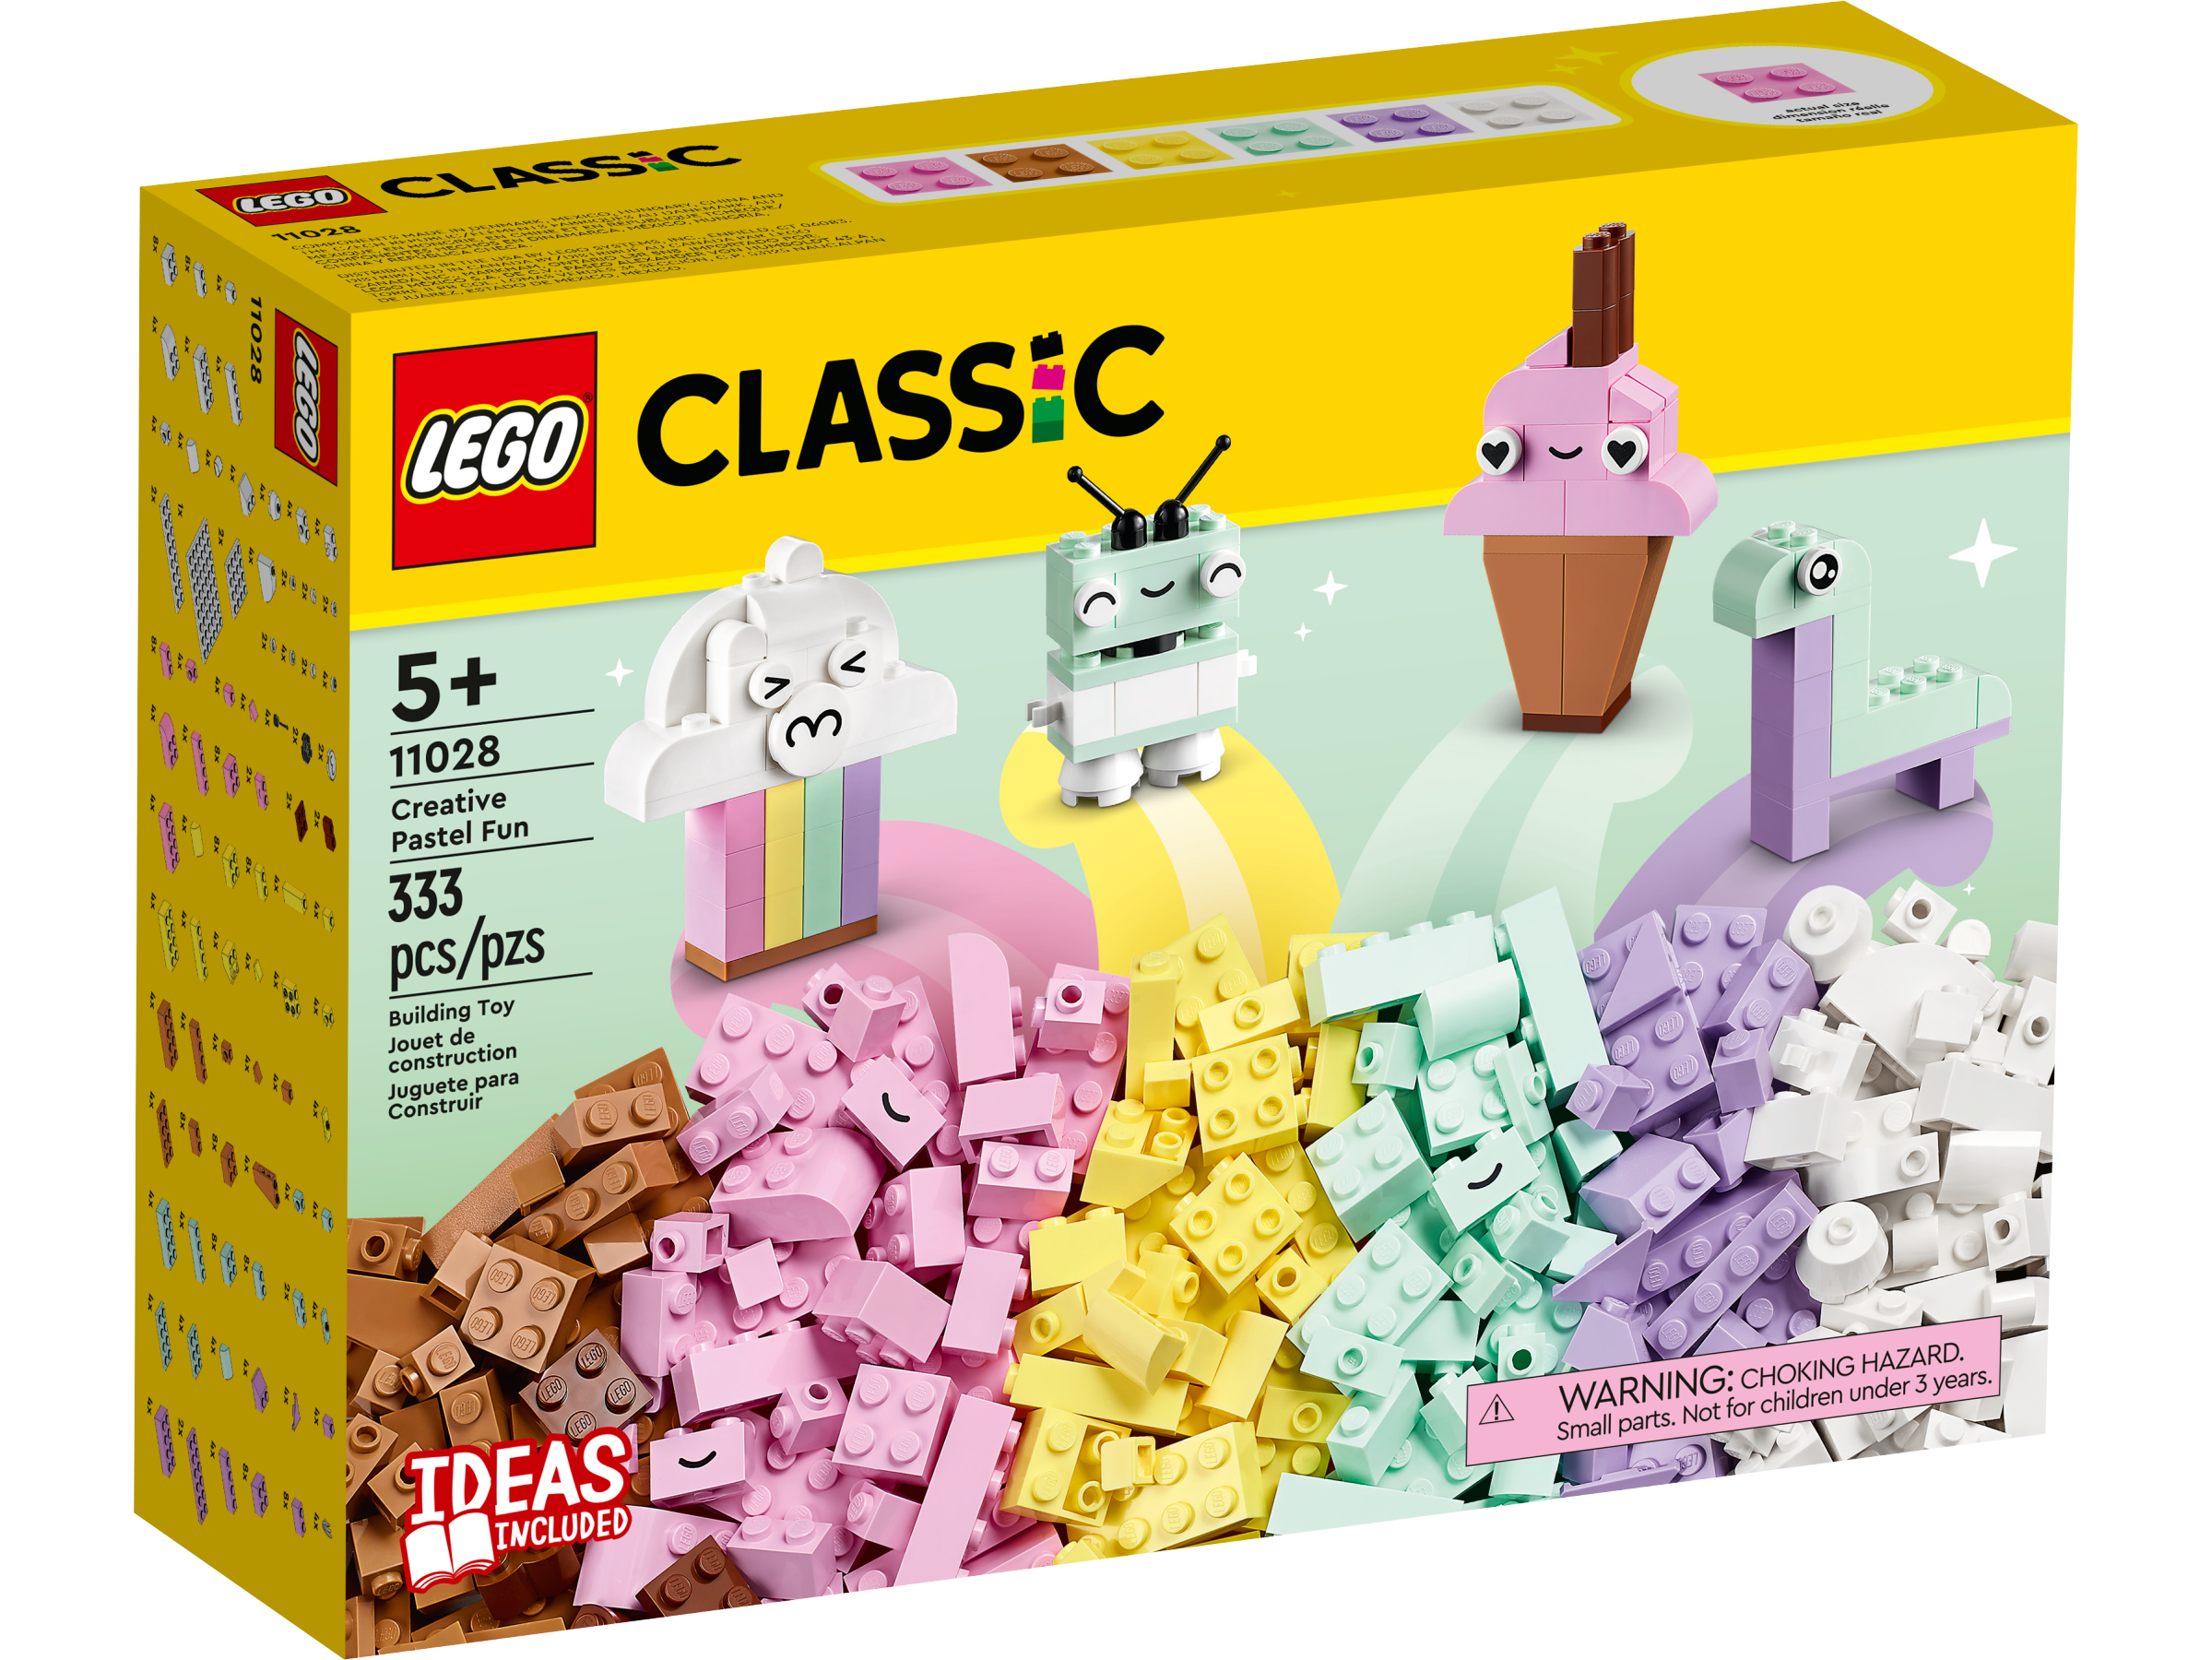 Creative Pastel Fun 11028 | Classic | Buy online at the Official